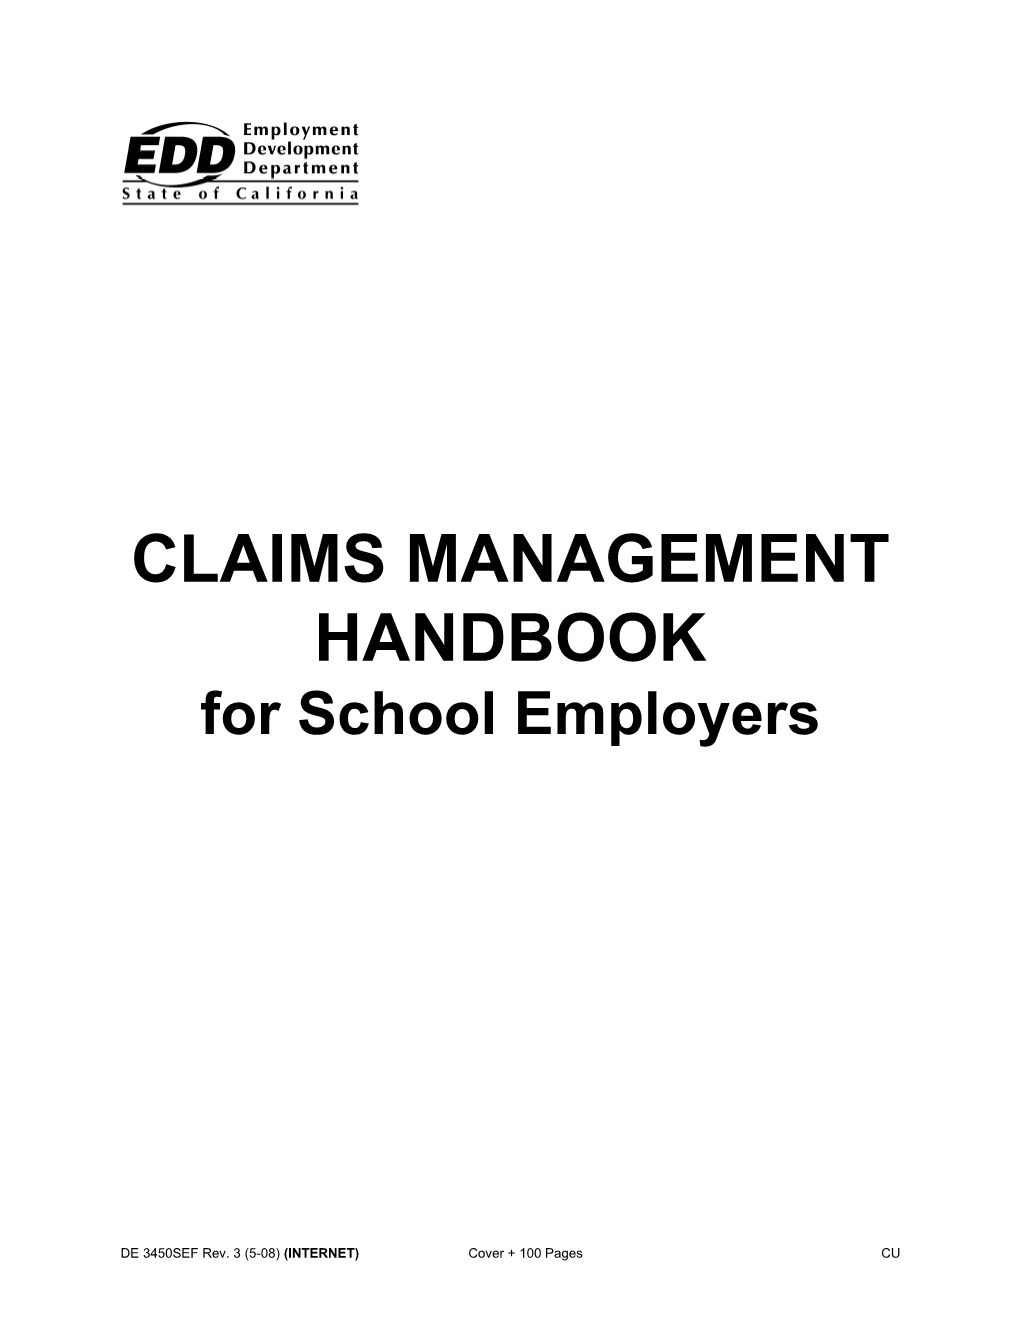 CLAIMS MANAGEMENT HANDBOOK for School Employers